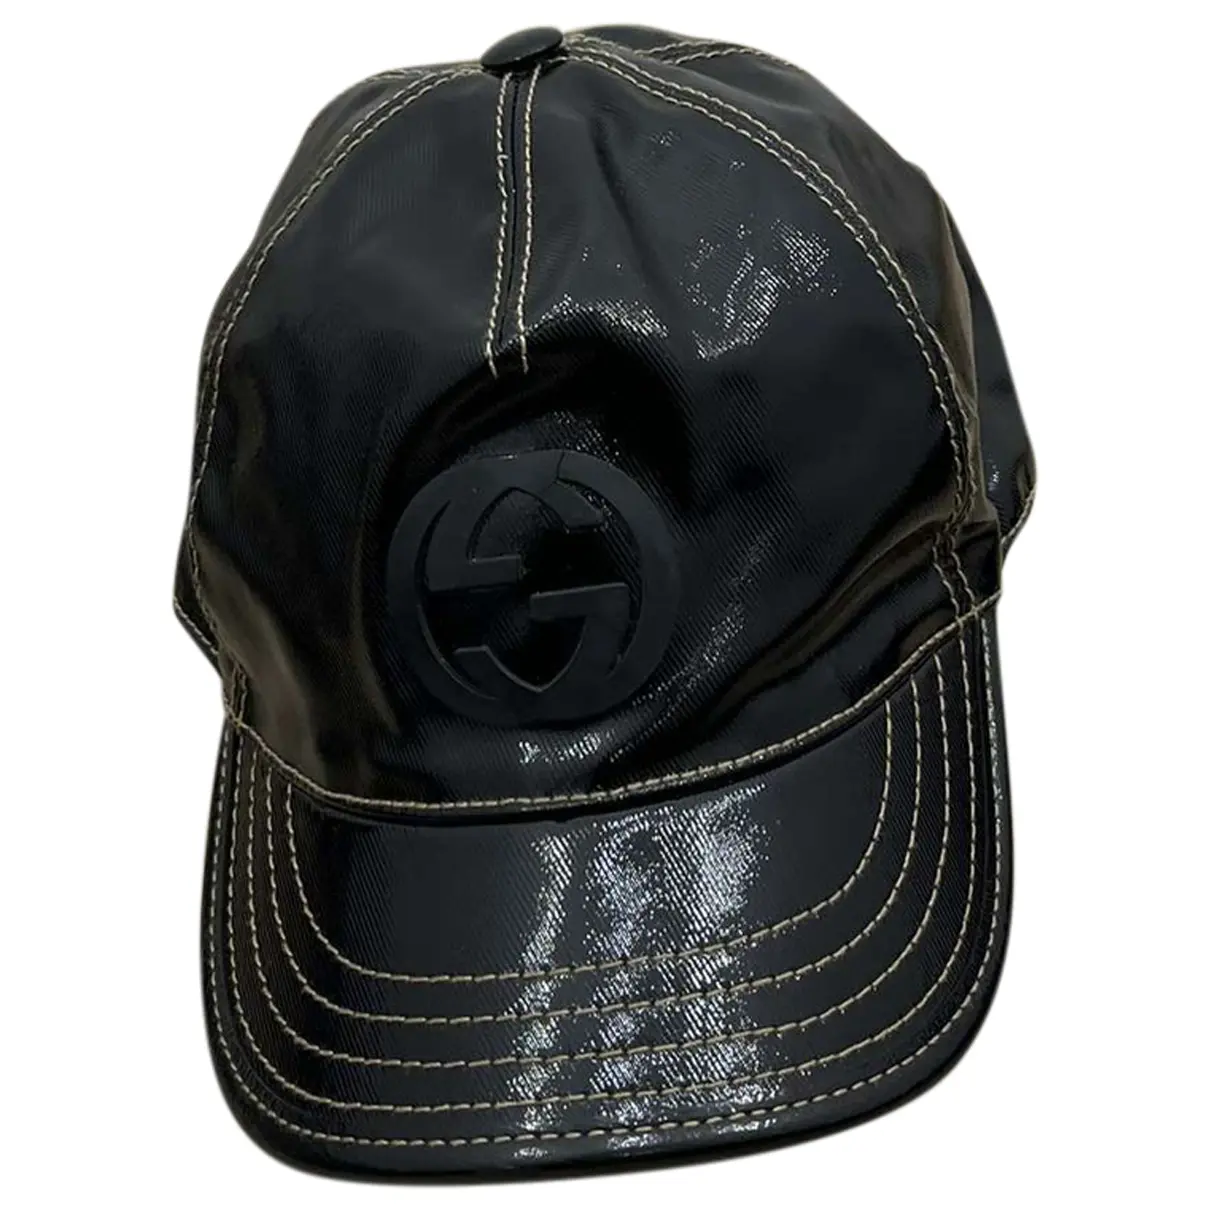 Patent leather hat